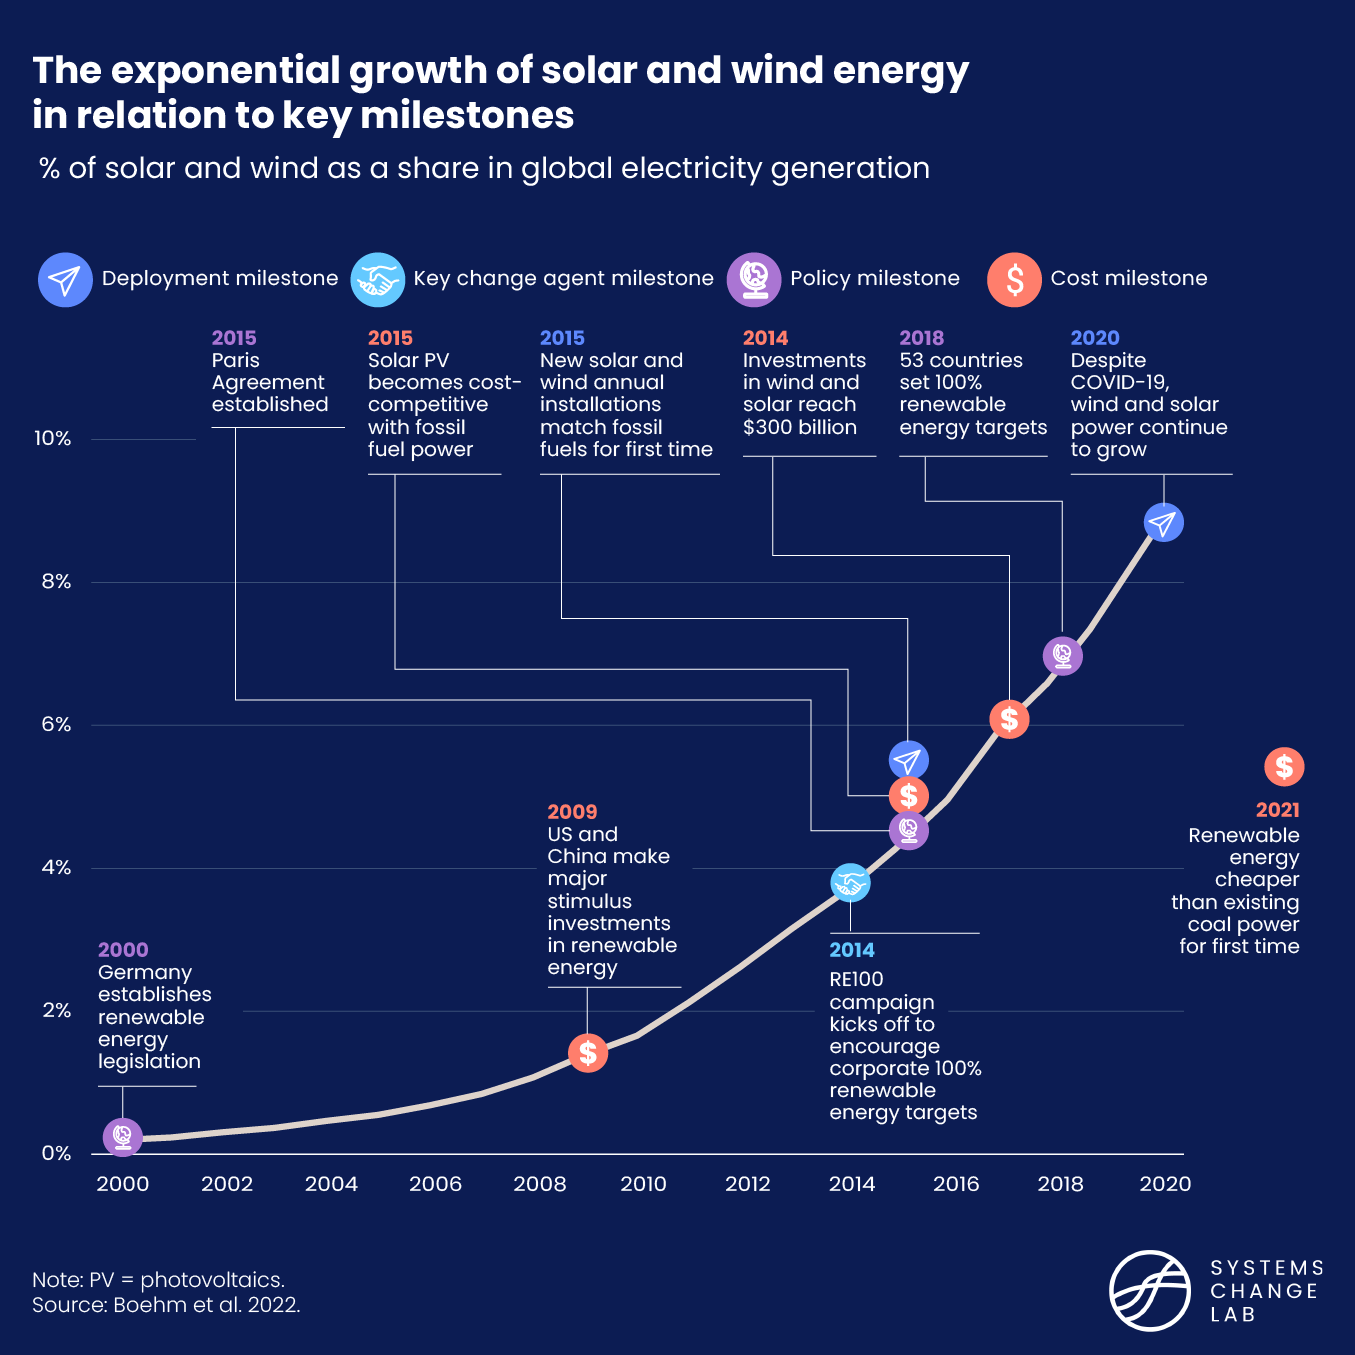 Timeline showing the exponential growth of solar and wind energy in relation to key milestones